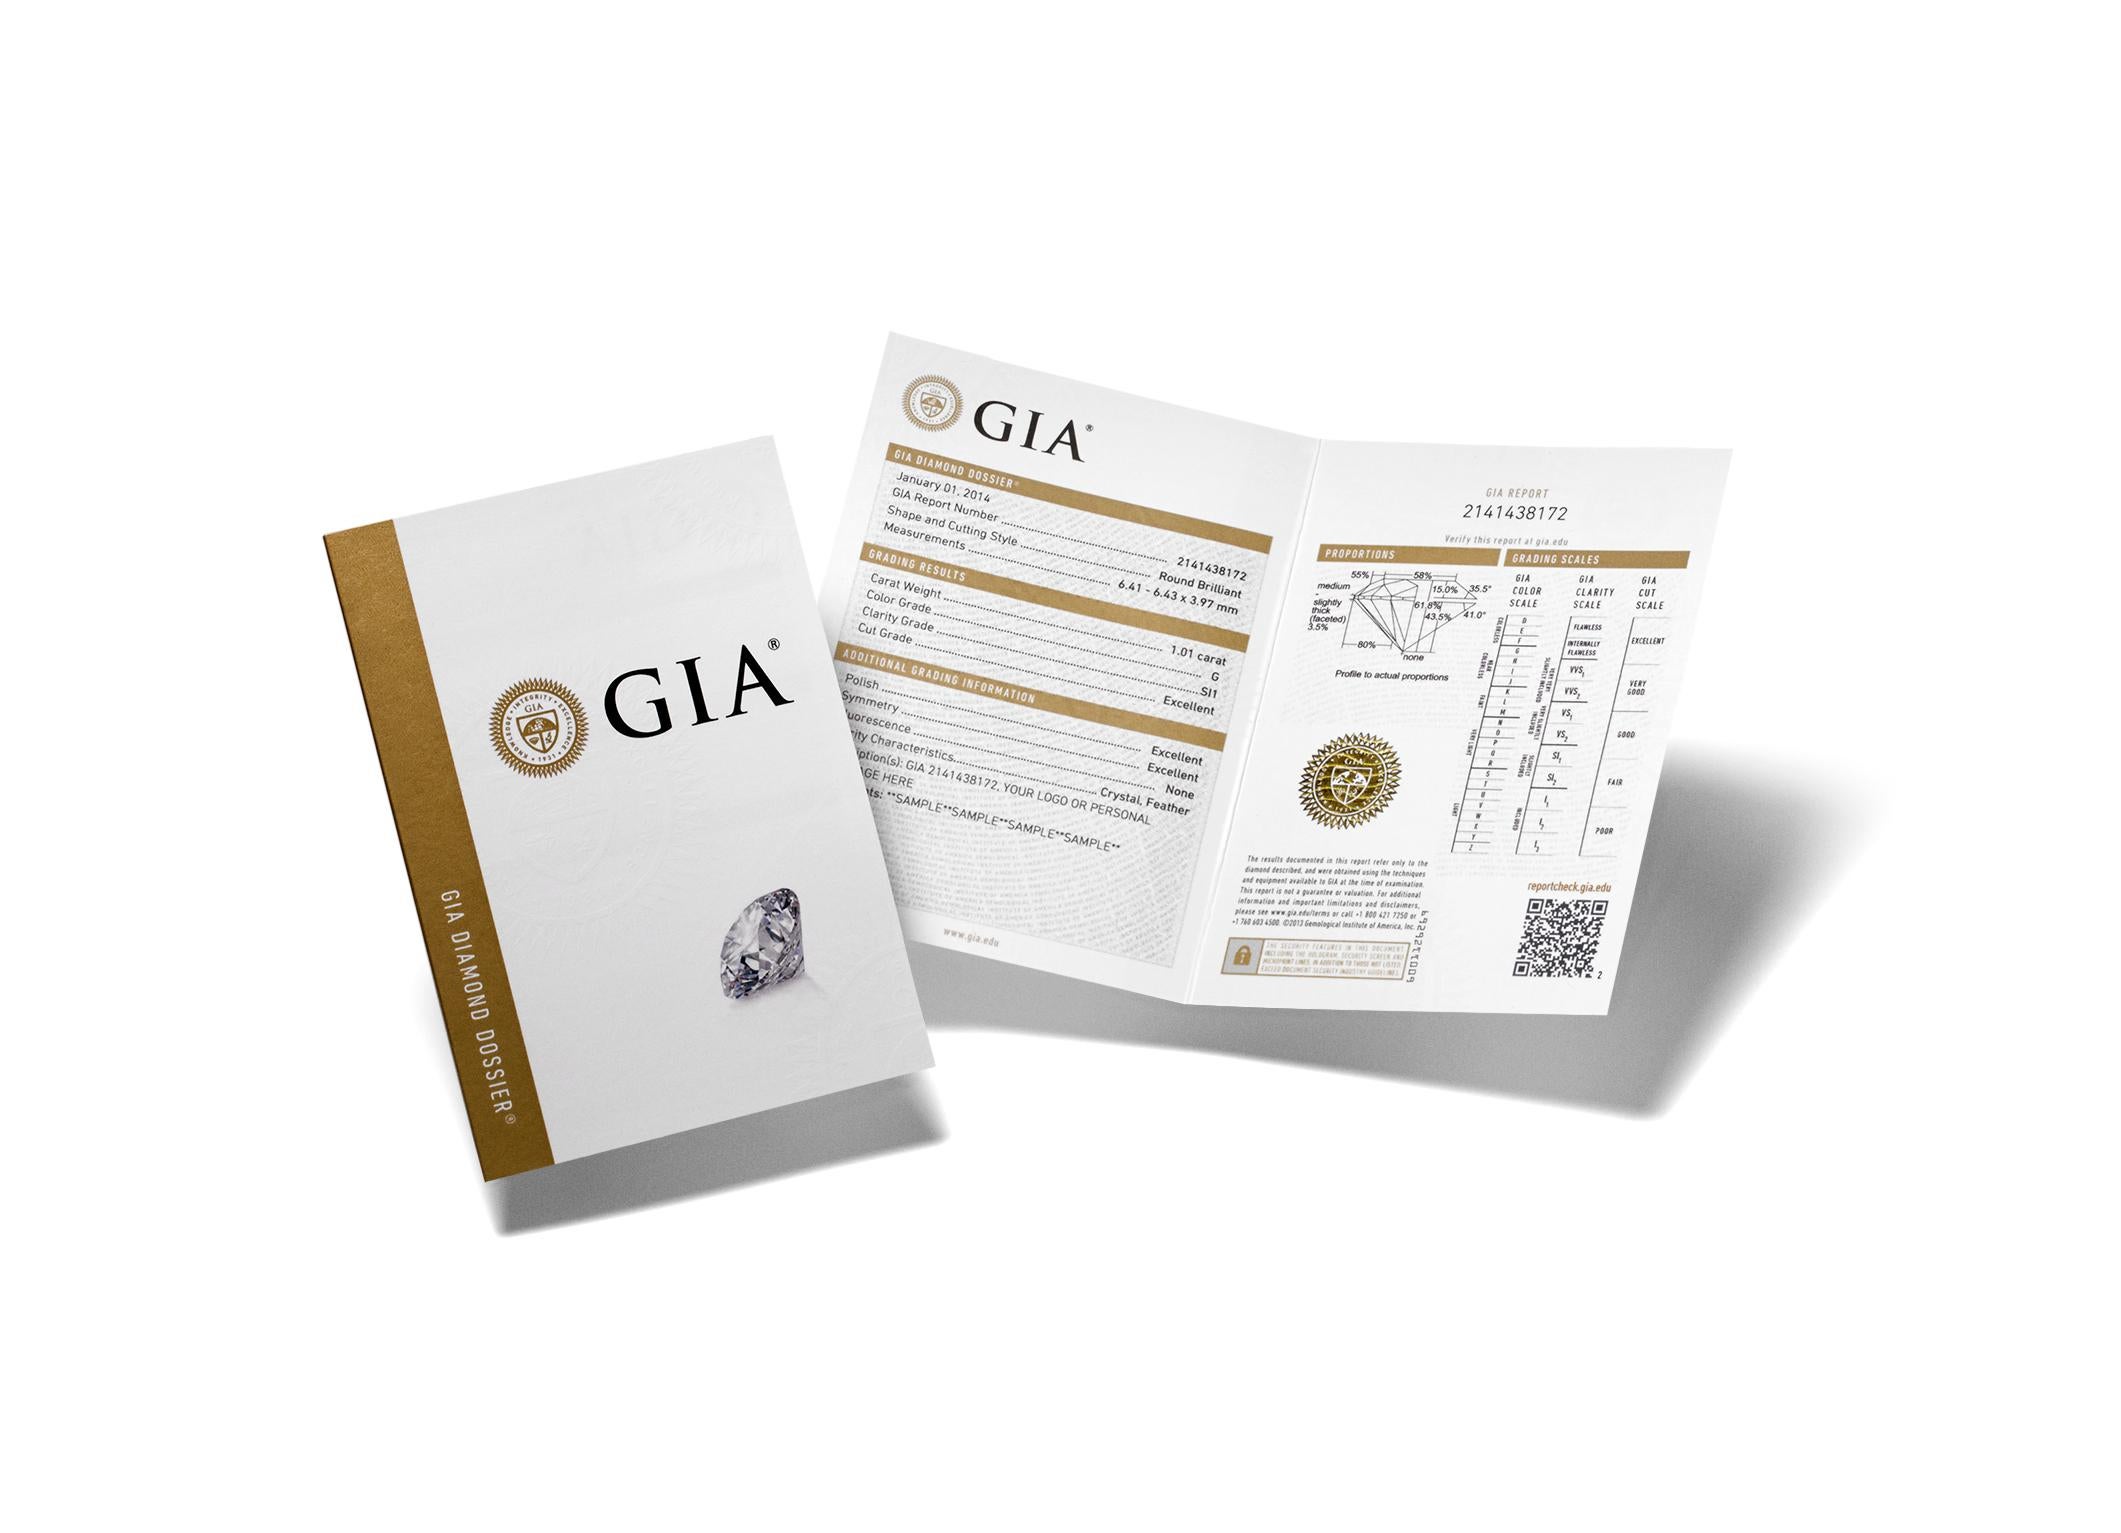 GIA Certified 0.50 Carat, E/VVS1, Brilliant Cut, Excellent Natural Diamond

Perfect Brilliants for perfect gifts.

5 C's:
Certificate: GIA
Carat: 0.50ct
Color: E
Clarity: VVS1(Very Very Slightly Included)
Cut: Excellent

Polish: Excellent
Symmetry: